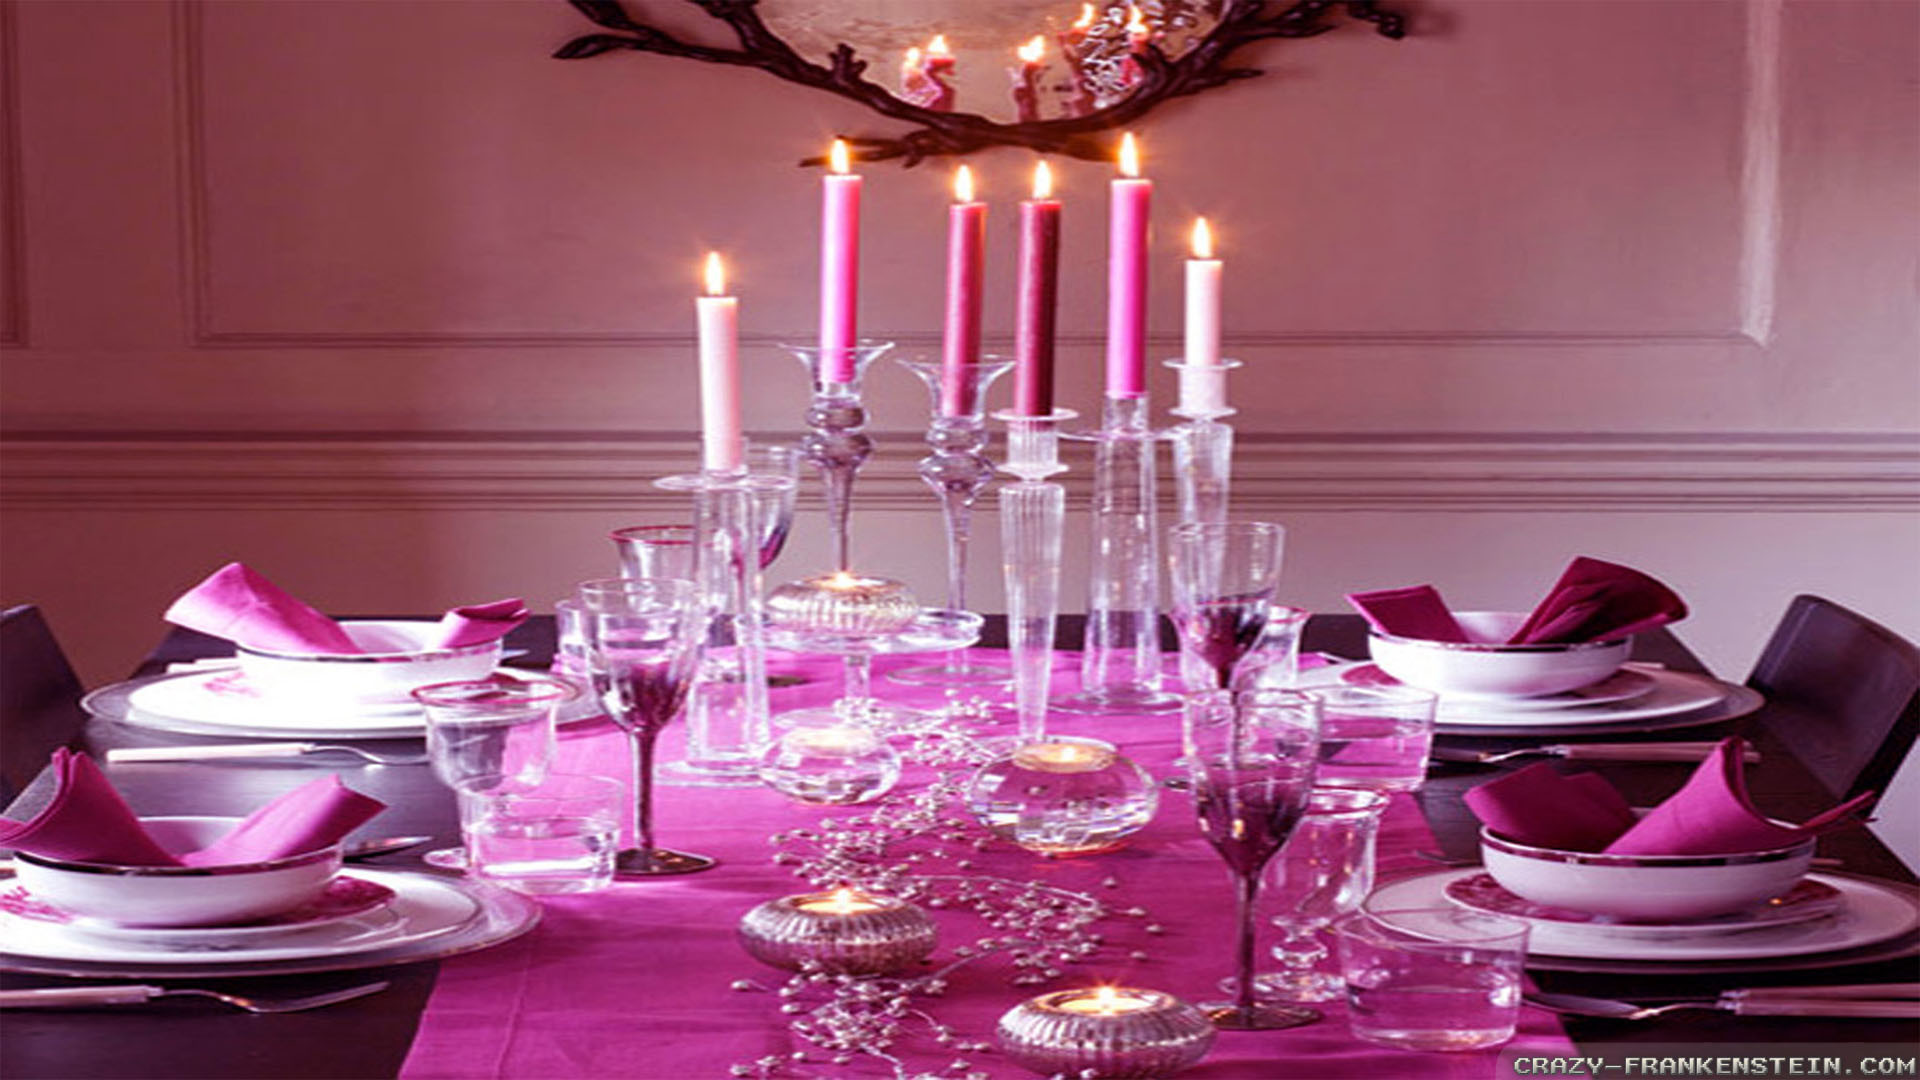 1920x1080 Wallpaper: Pink Christmas romantic table wallpapers. Resolution: 1024x768 |  1280x1024 | 1600x1200. Widescreen Res: 1440x900 | 1680x1050 | 1920x1200